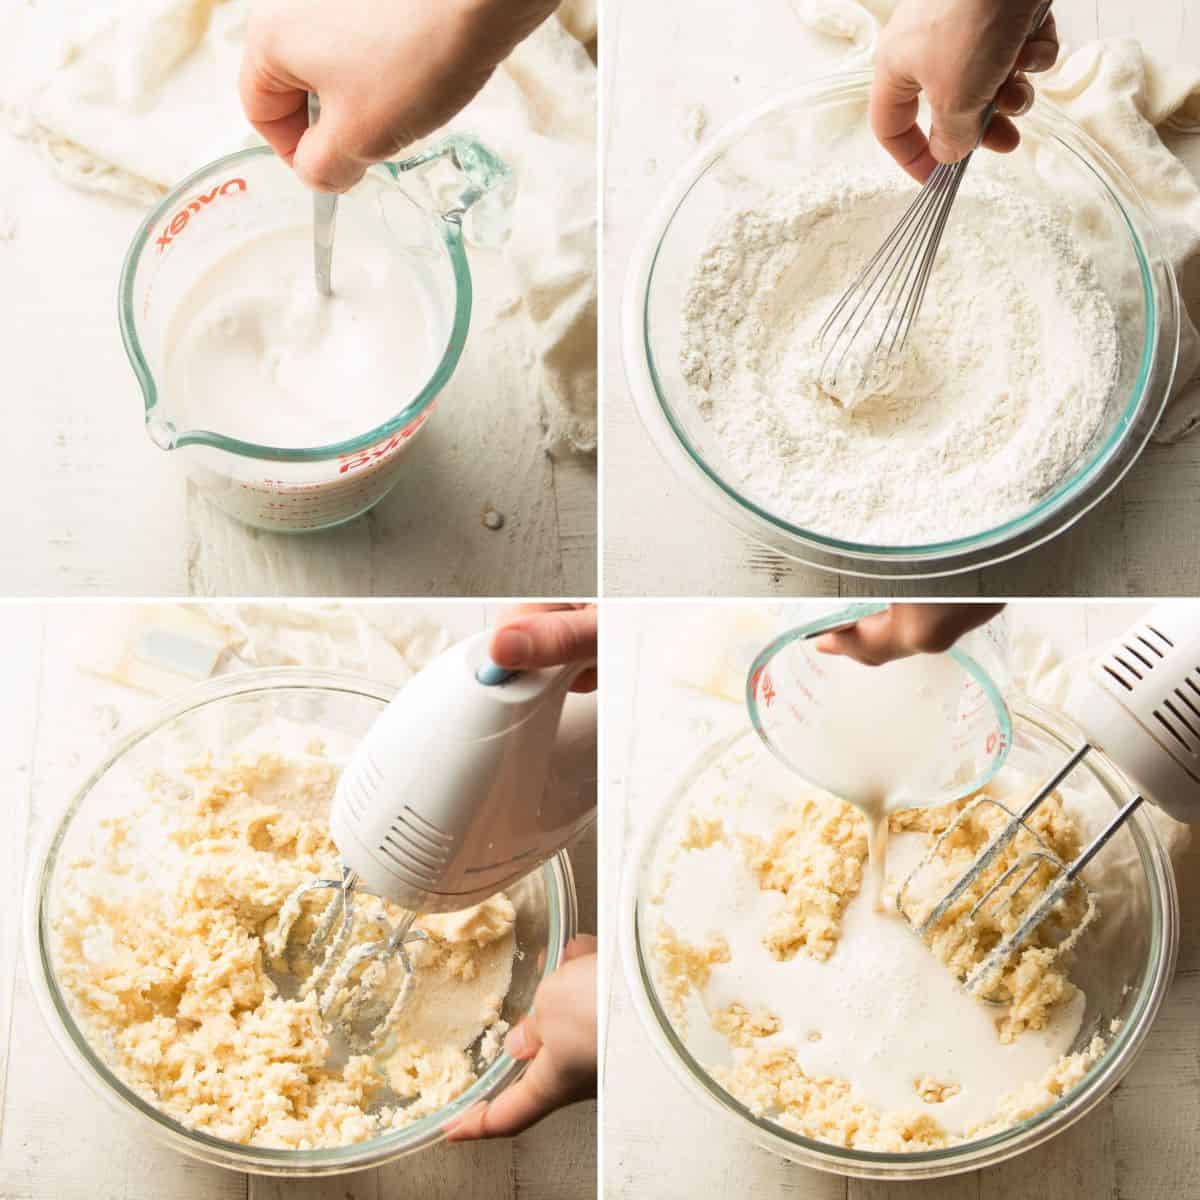 Collage Showing First 4 Steps for Making Vegan Lemon Cake: Mix Liquid Ingredients, Mix Dry Ingredients, Beat Butter and Sugar Together, and Add Liquid Ingredients